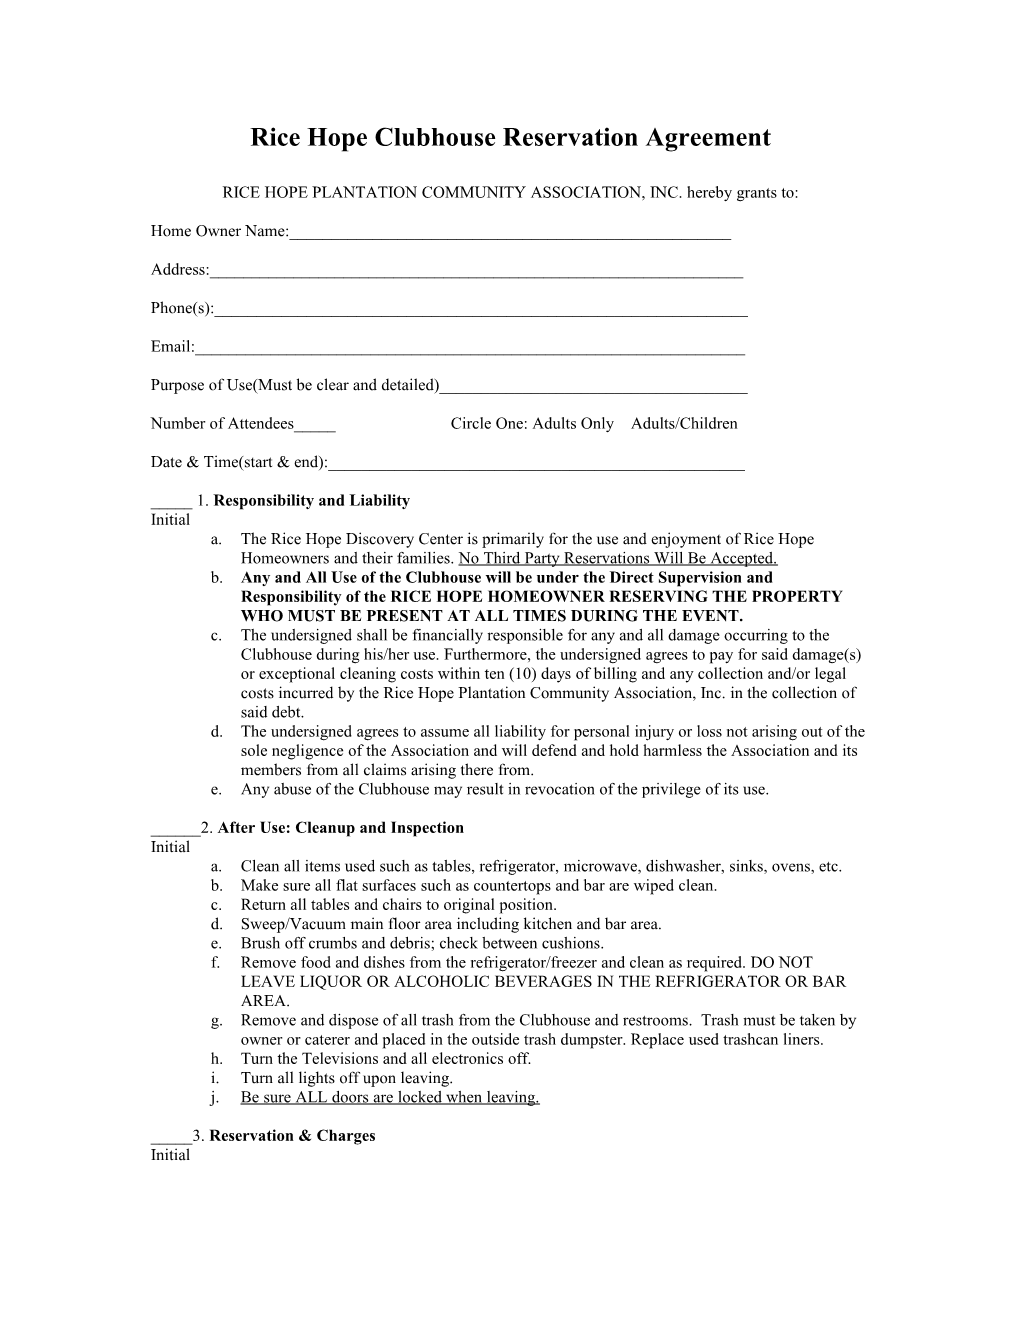 Rice Hope Clubhouse Reservation Agreement